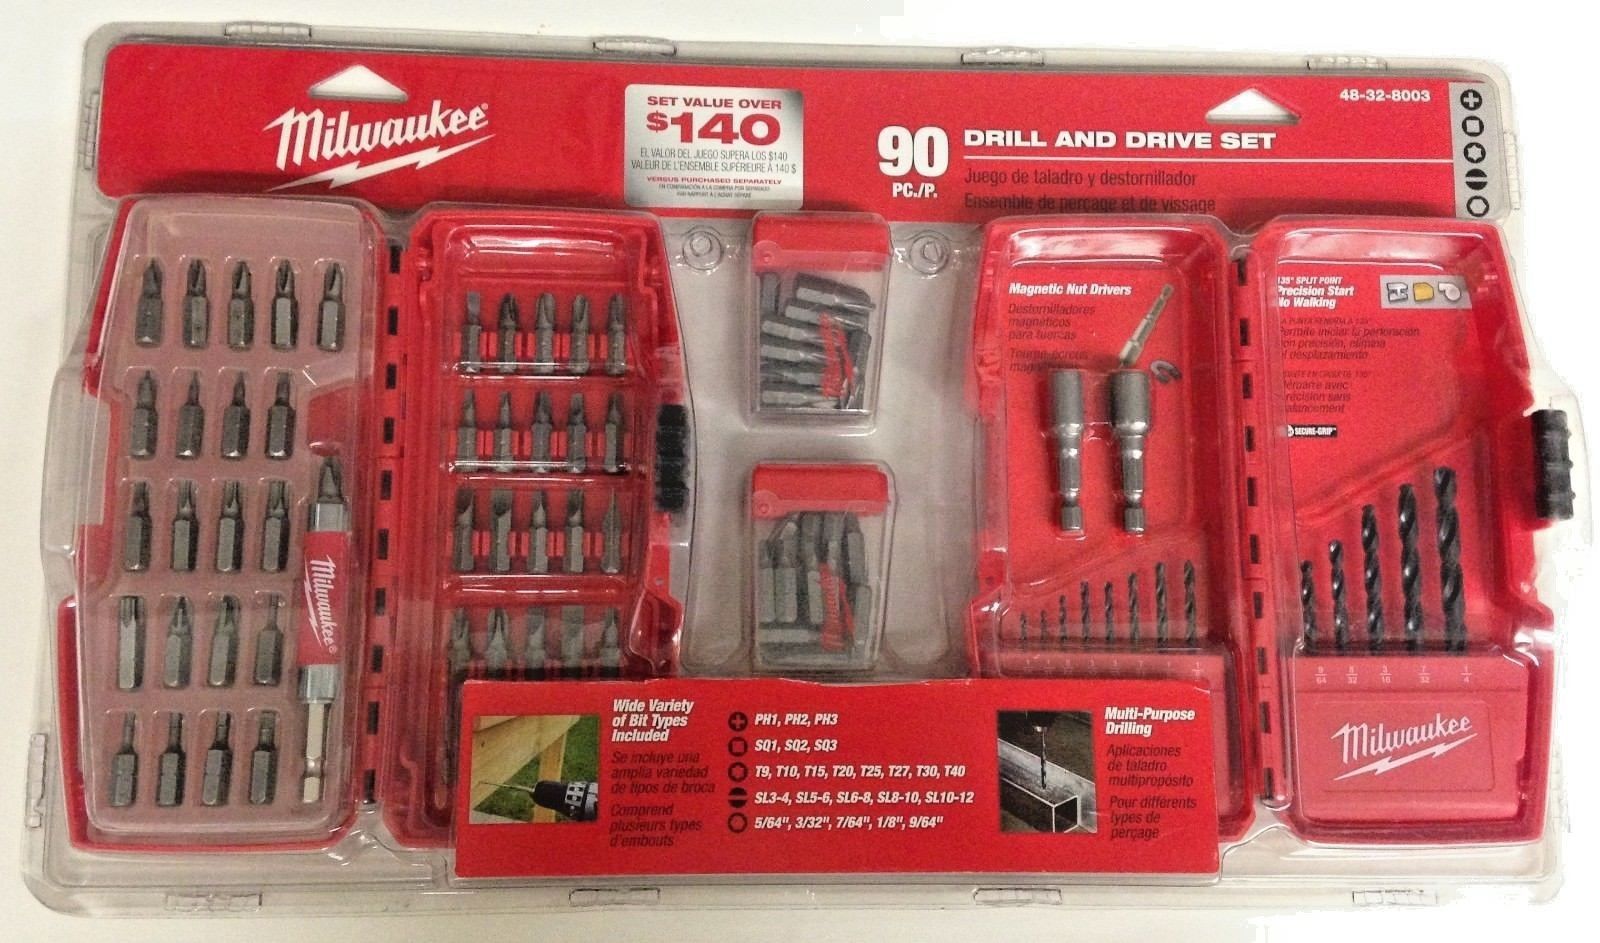 Milwaukee 48-32-8003 90 Piece Drill and Drive Set